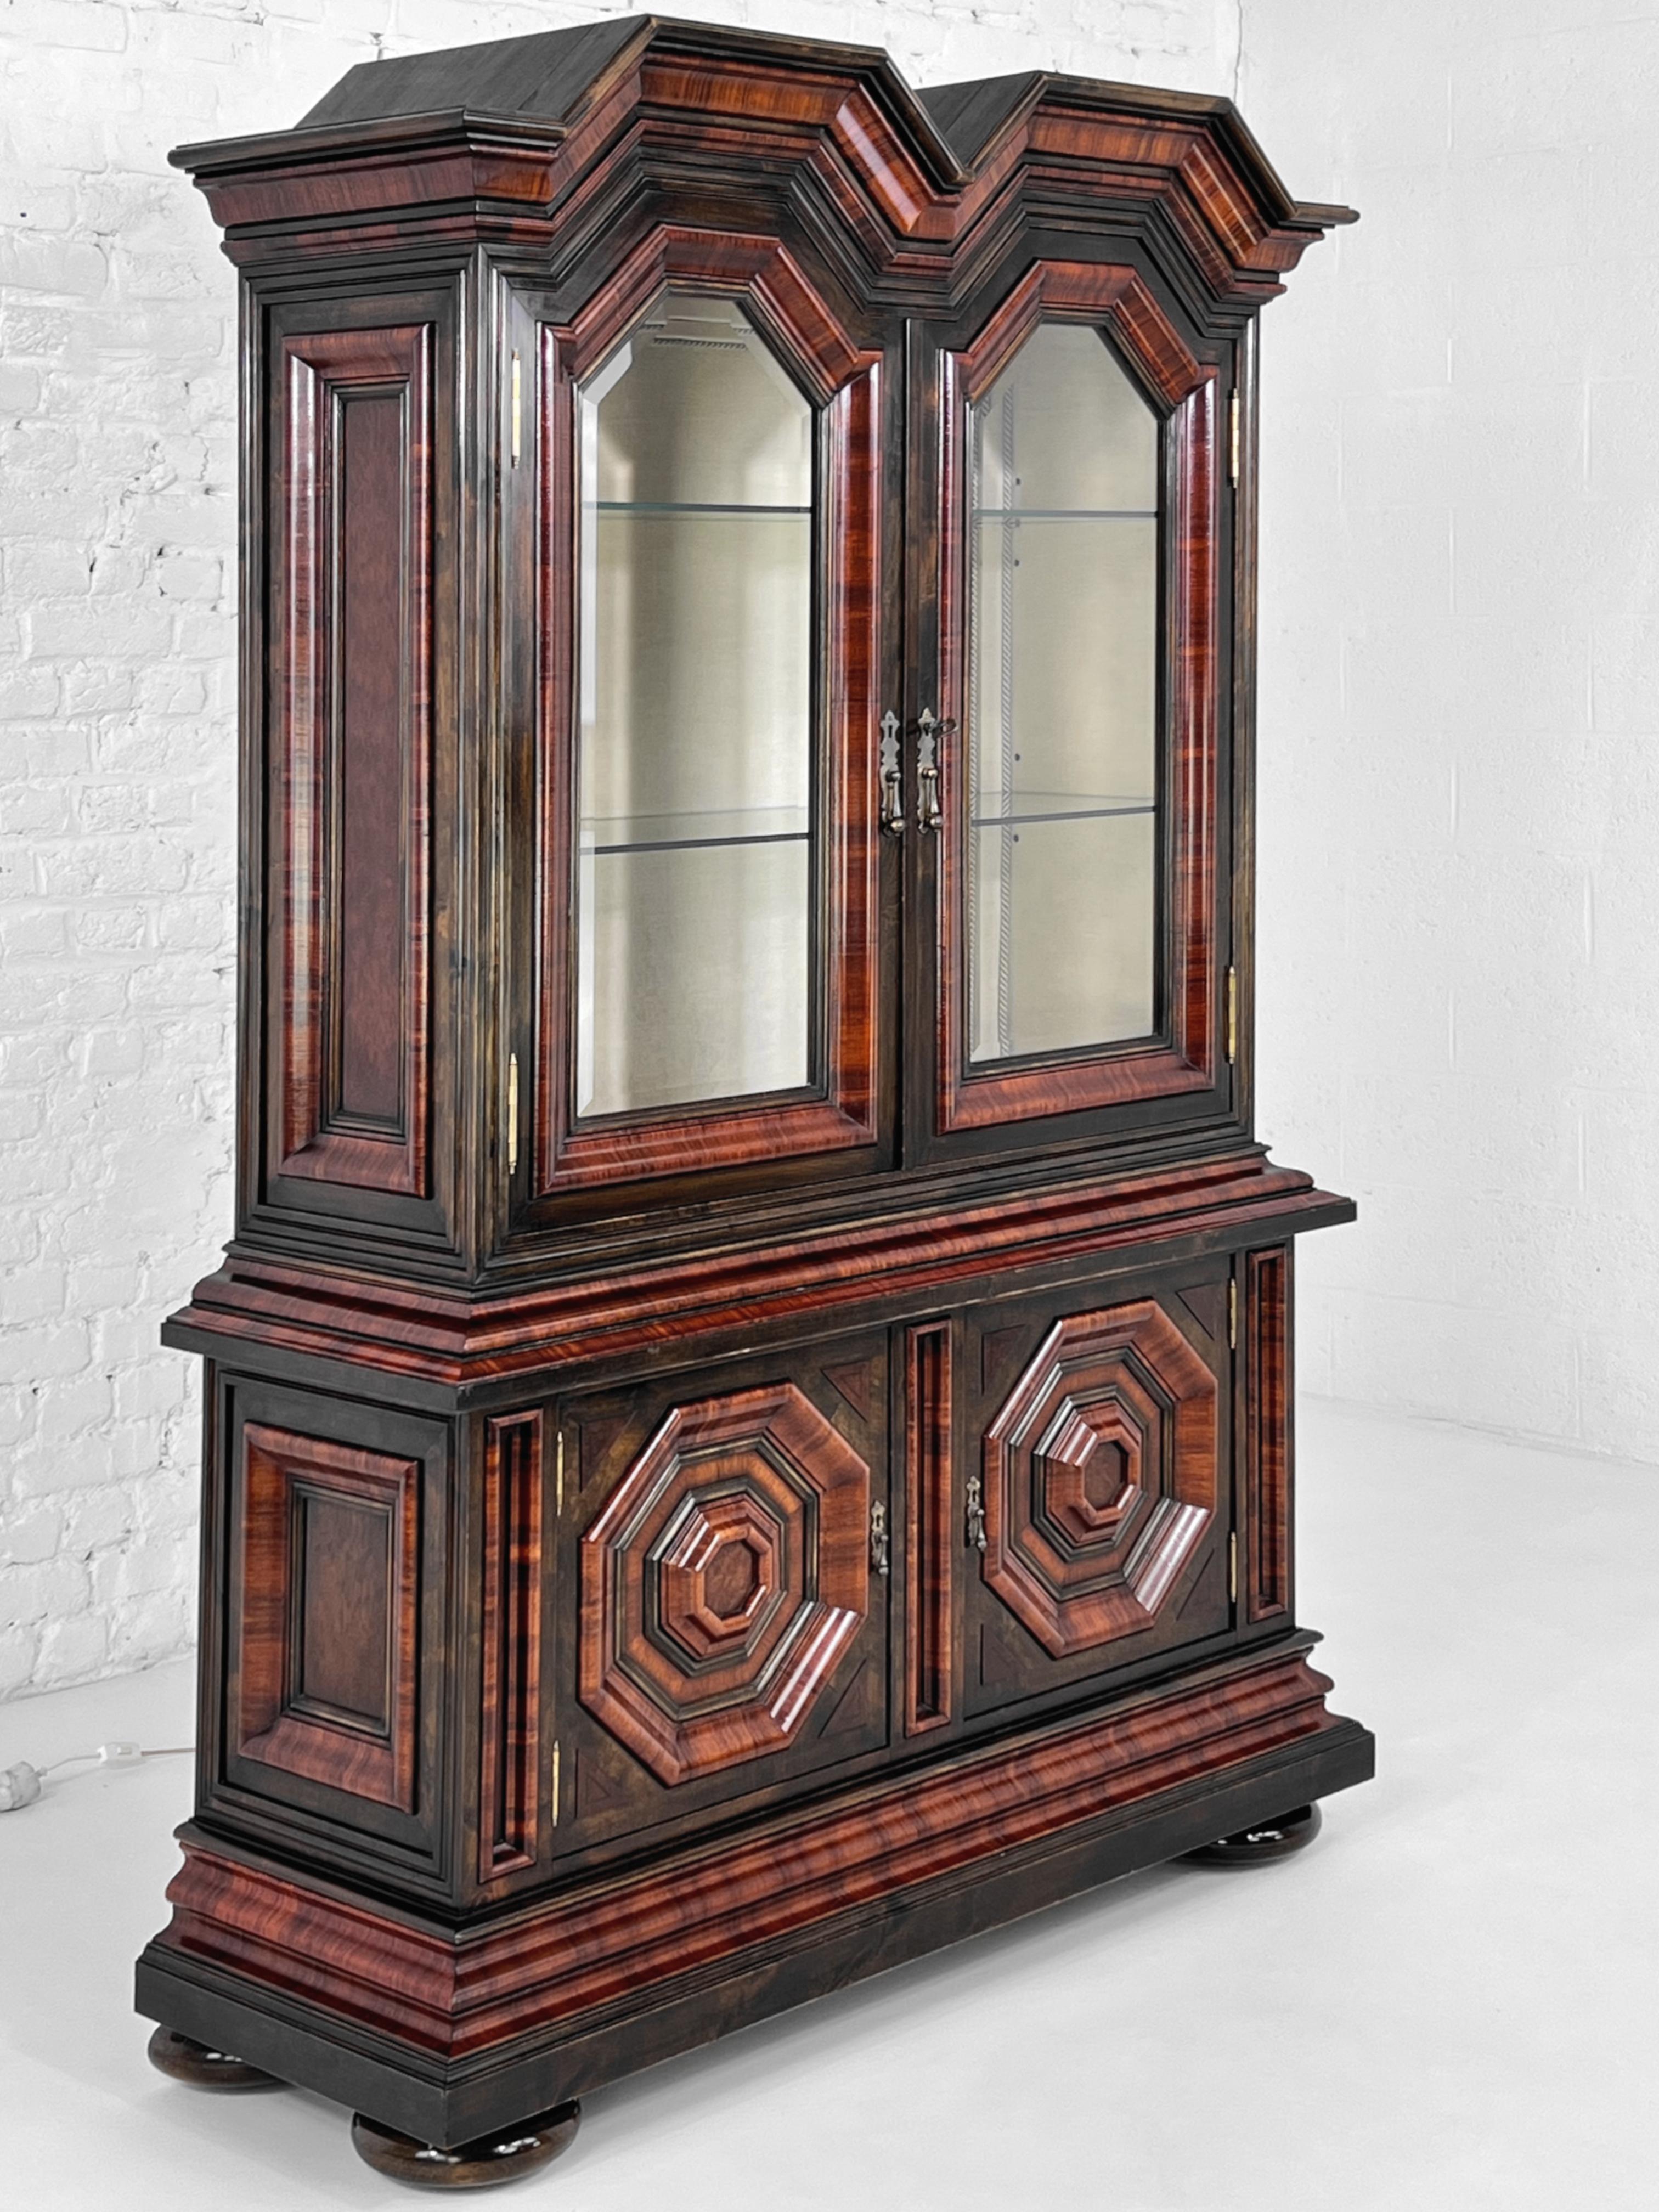 Baroque And Rococo Style Wooden Marquetry and Glass Armoire or Vitrine Cabinet composed of 2 parts:

Up one with vitrine lightened storage spaces, 2 graphic glass panel doors with fine sculpted finishes, opening on glass shelves and beige fabric